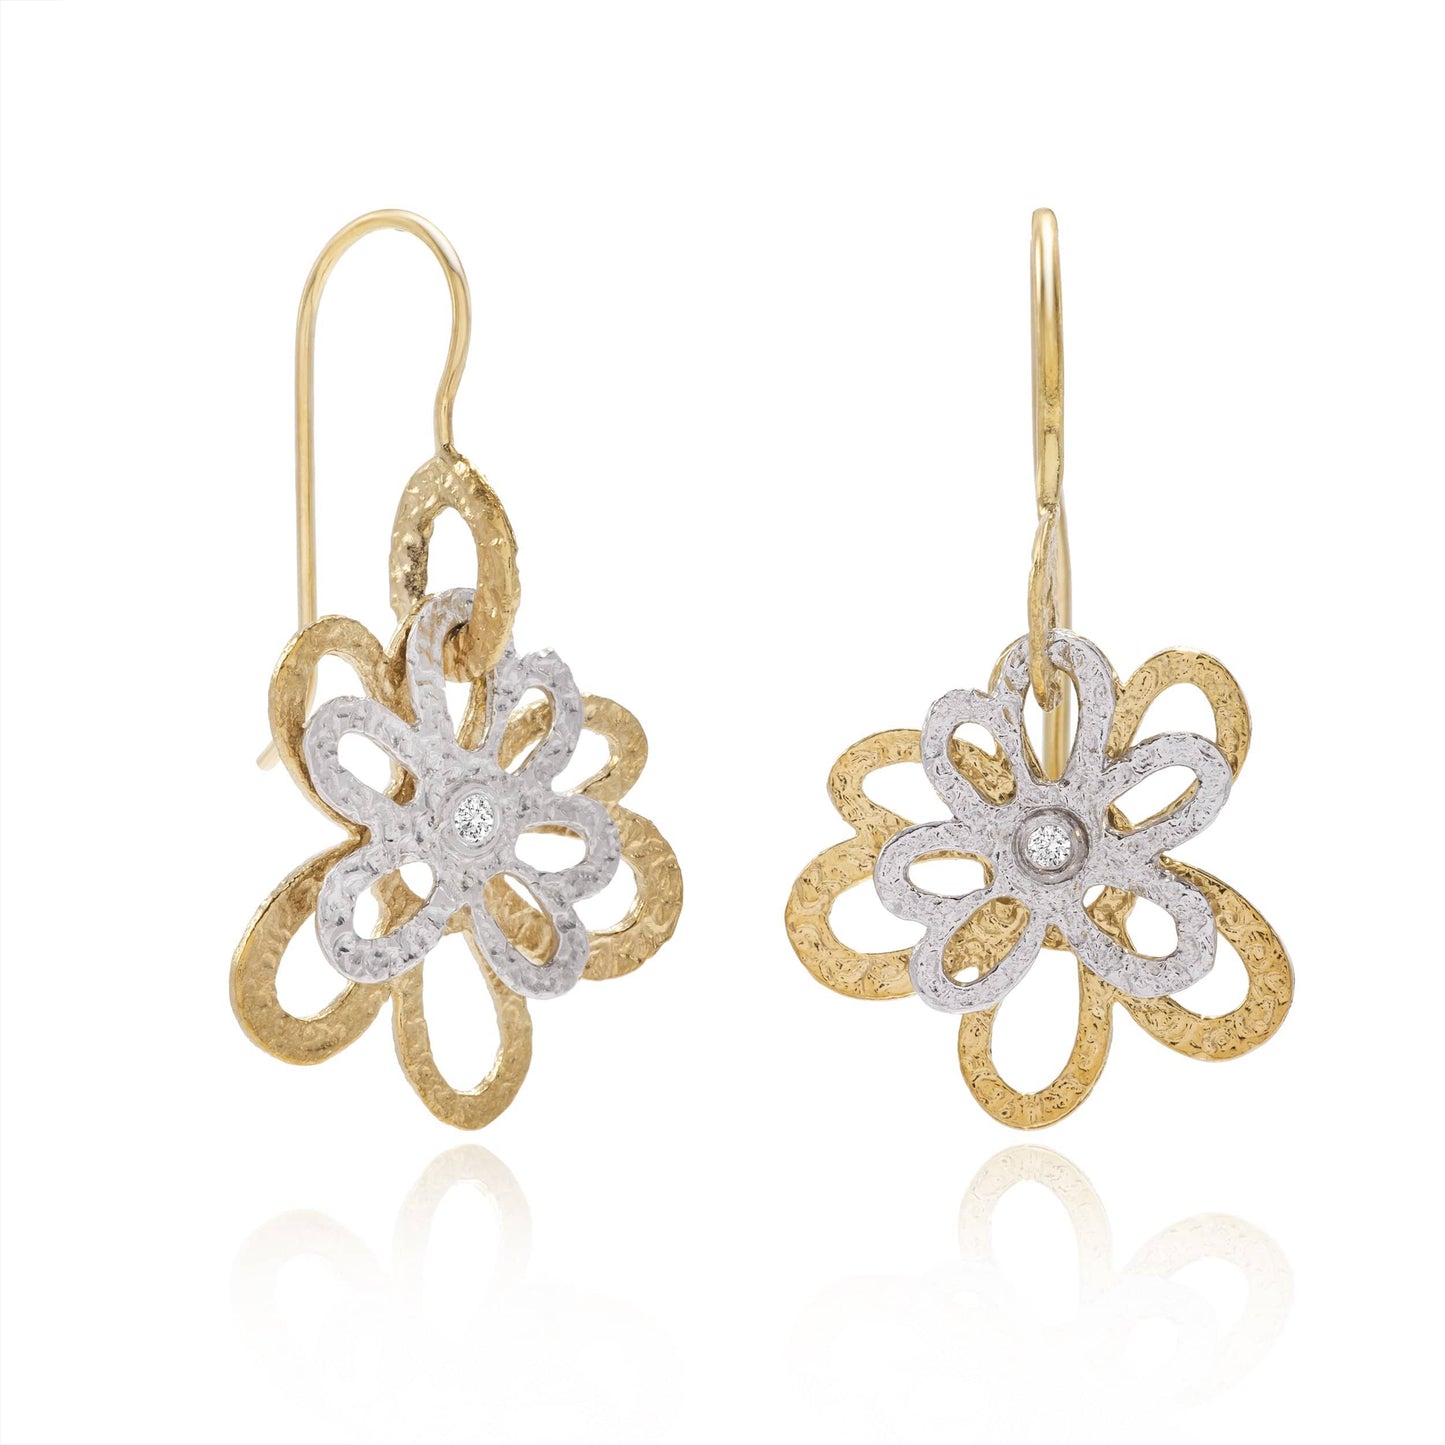 Dalia T Online Earrings Nature Collection 14KT Yellow & White Gold Multi Flowers Drop Earrings